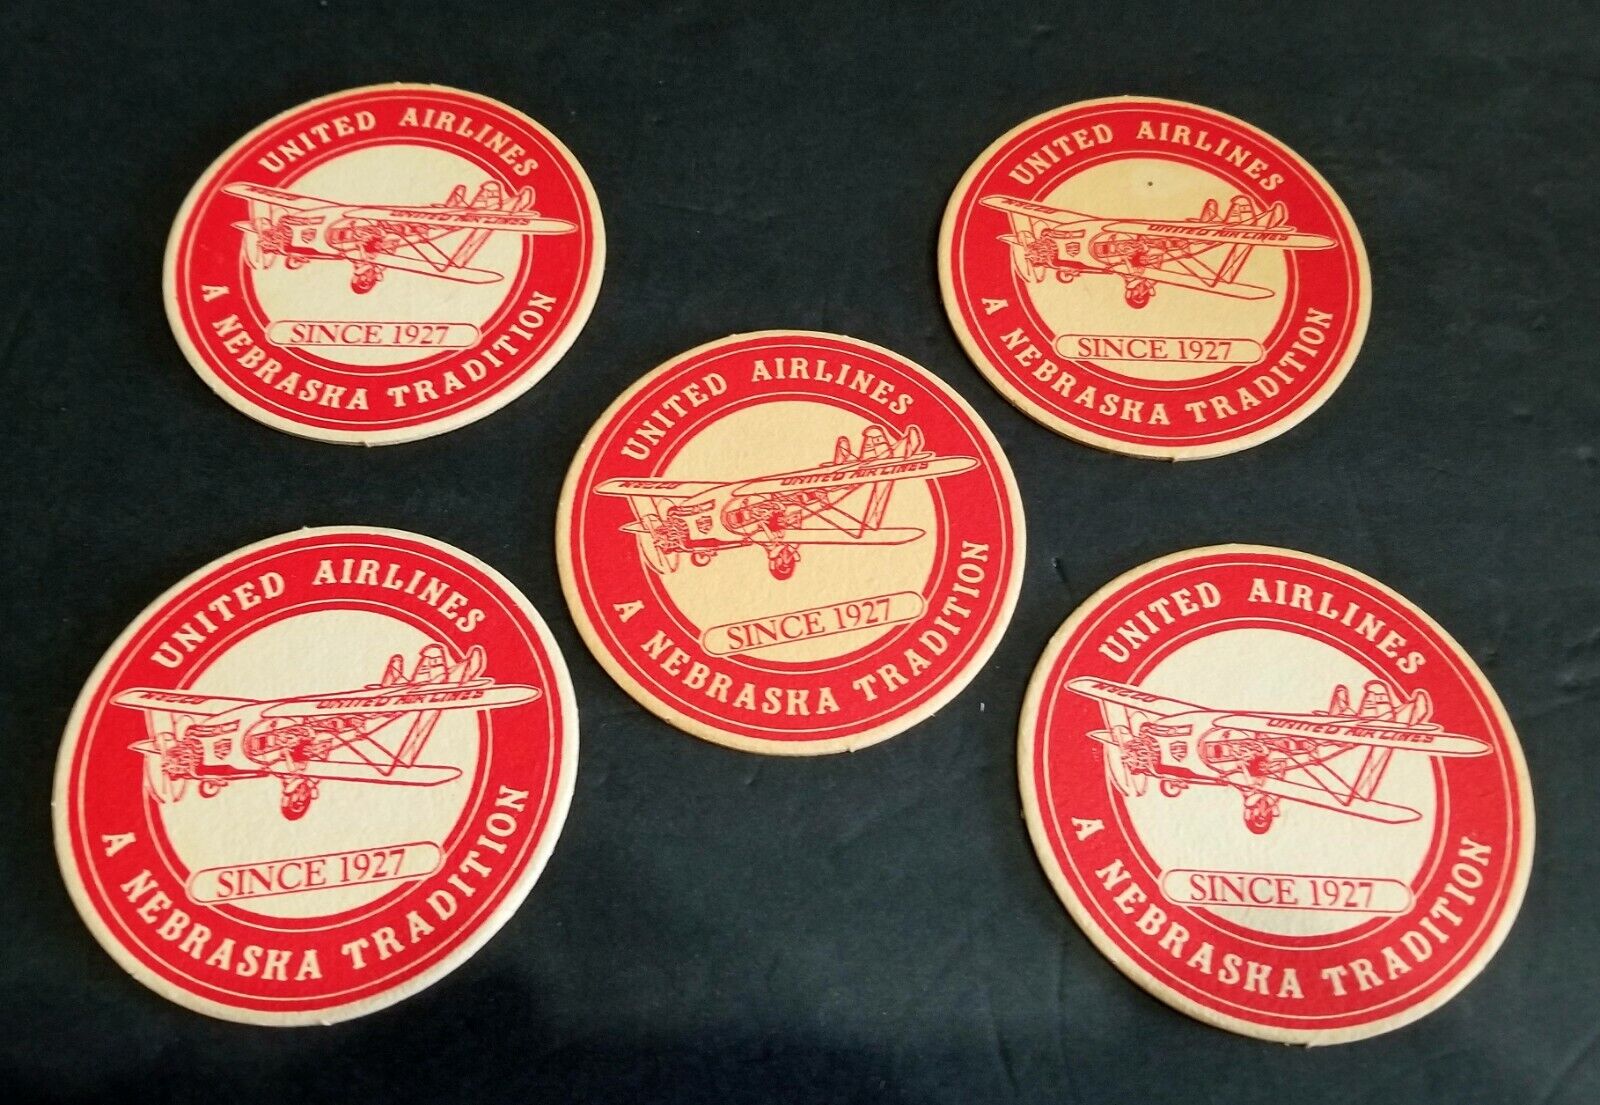 5- VINTAGE UNITED AIRLINES COASTERS A NEBRASKA TRADITION SINCE 1927 EXCELLENT 